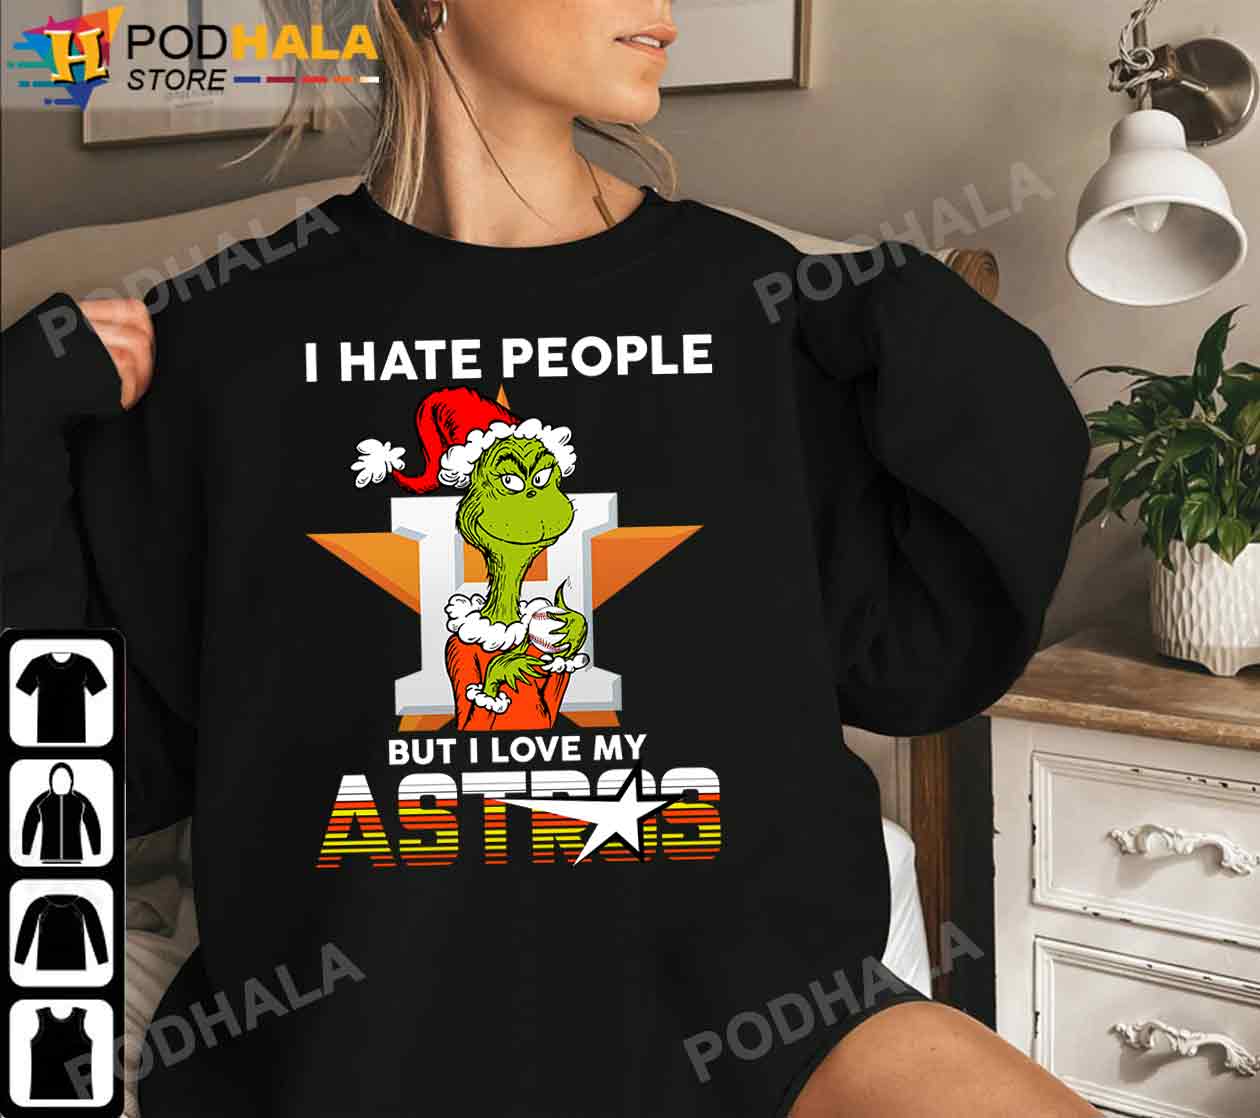 Official Houston astros hate us cause they aint us T-shirt, hoodie